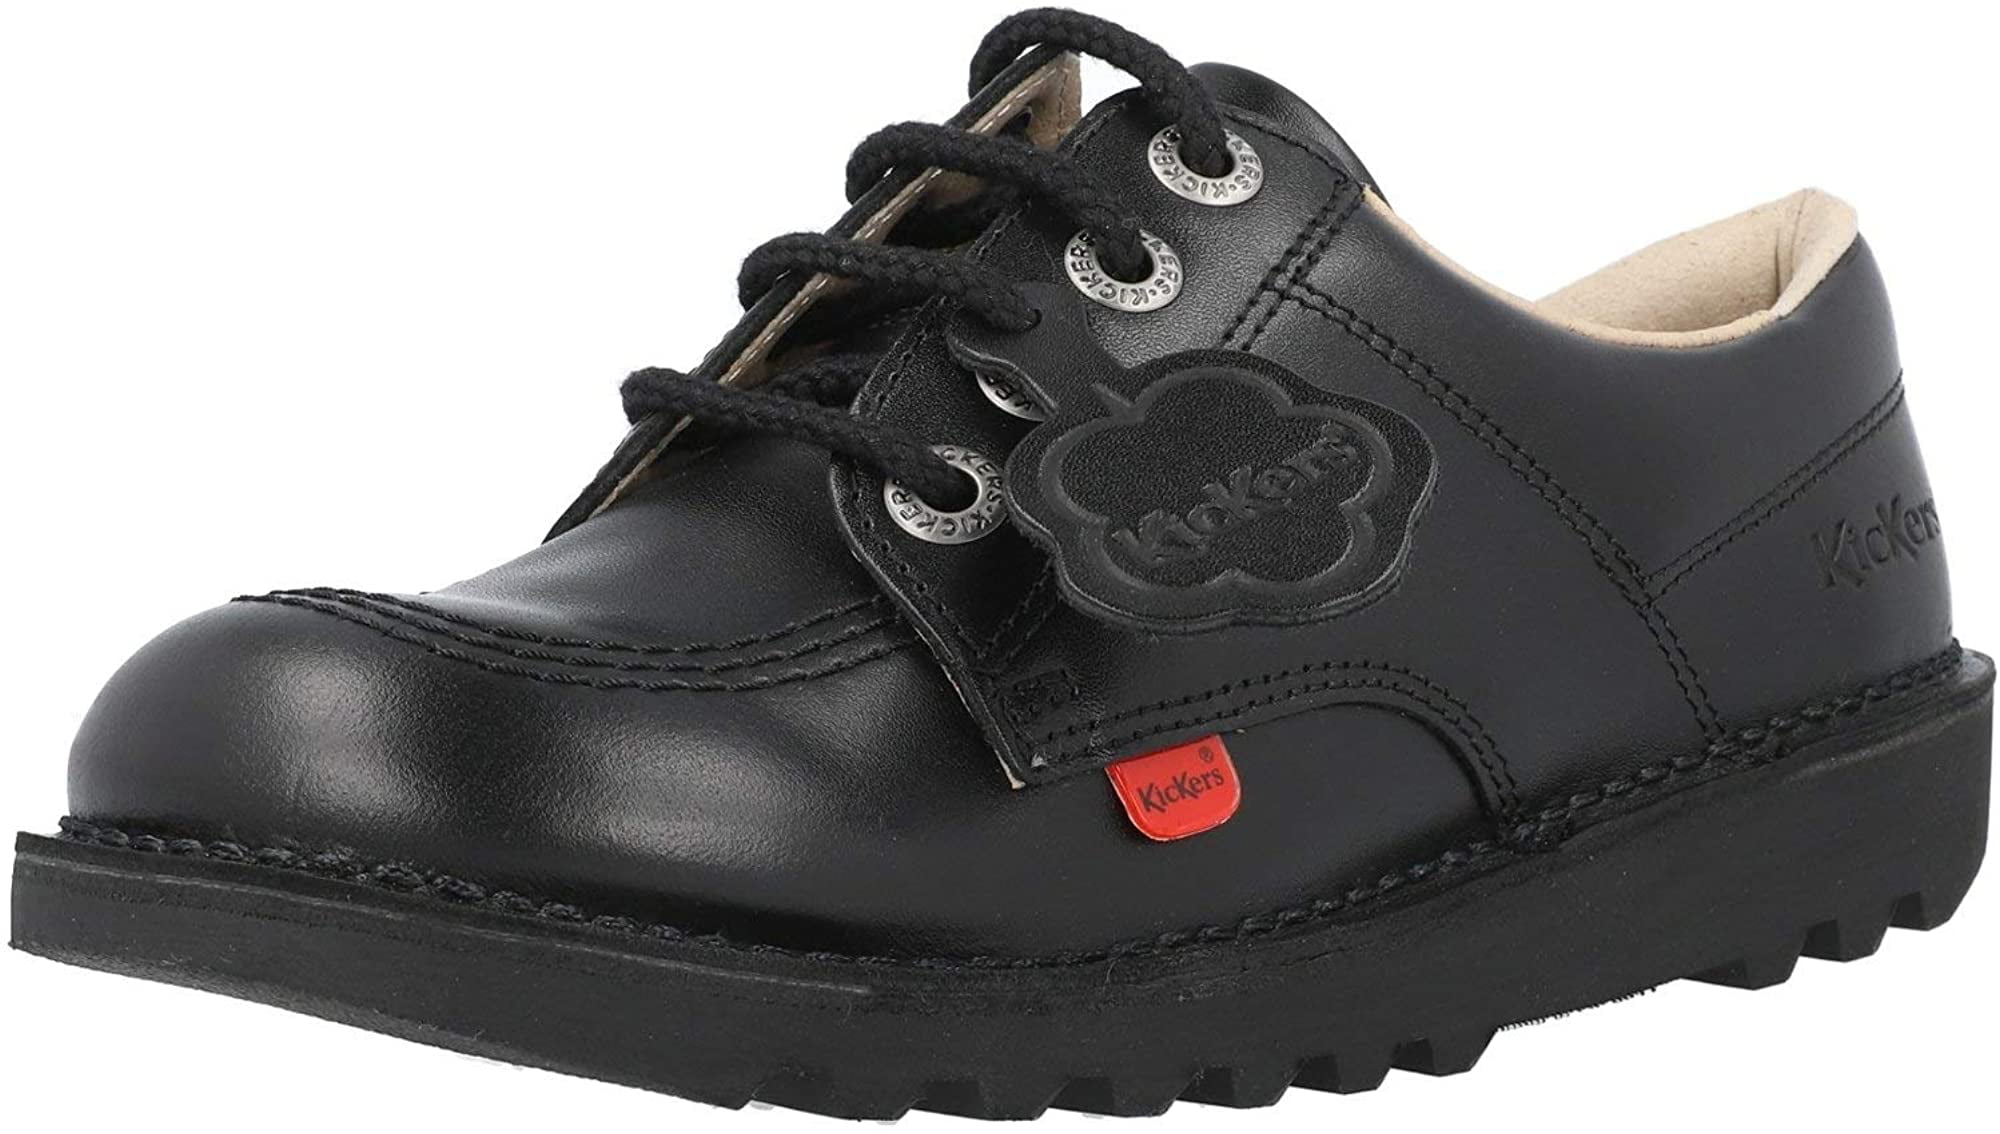 Kickers Kick Hi Black Leather Back to School Shoes in Men's Sizes 